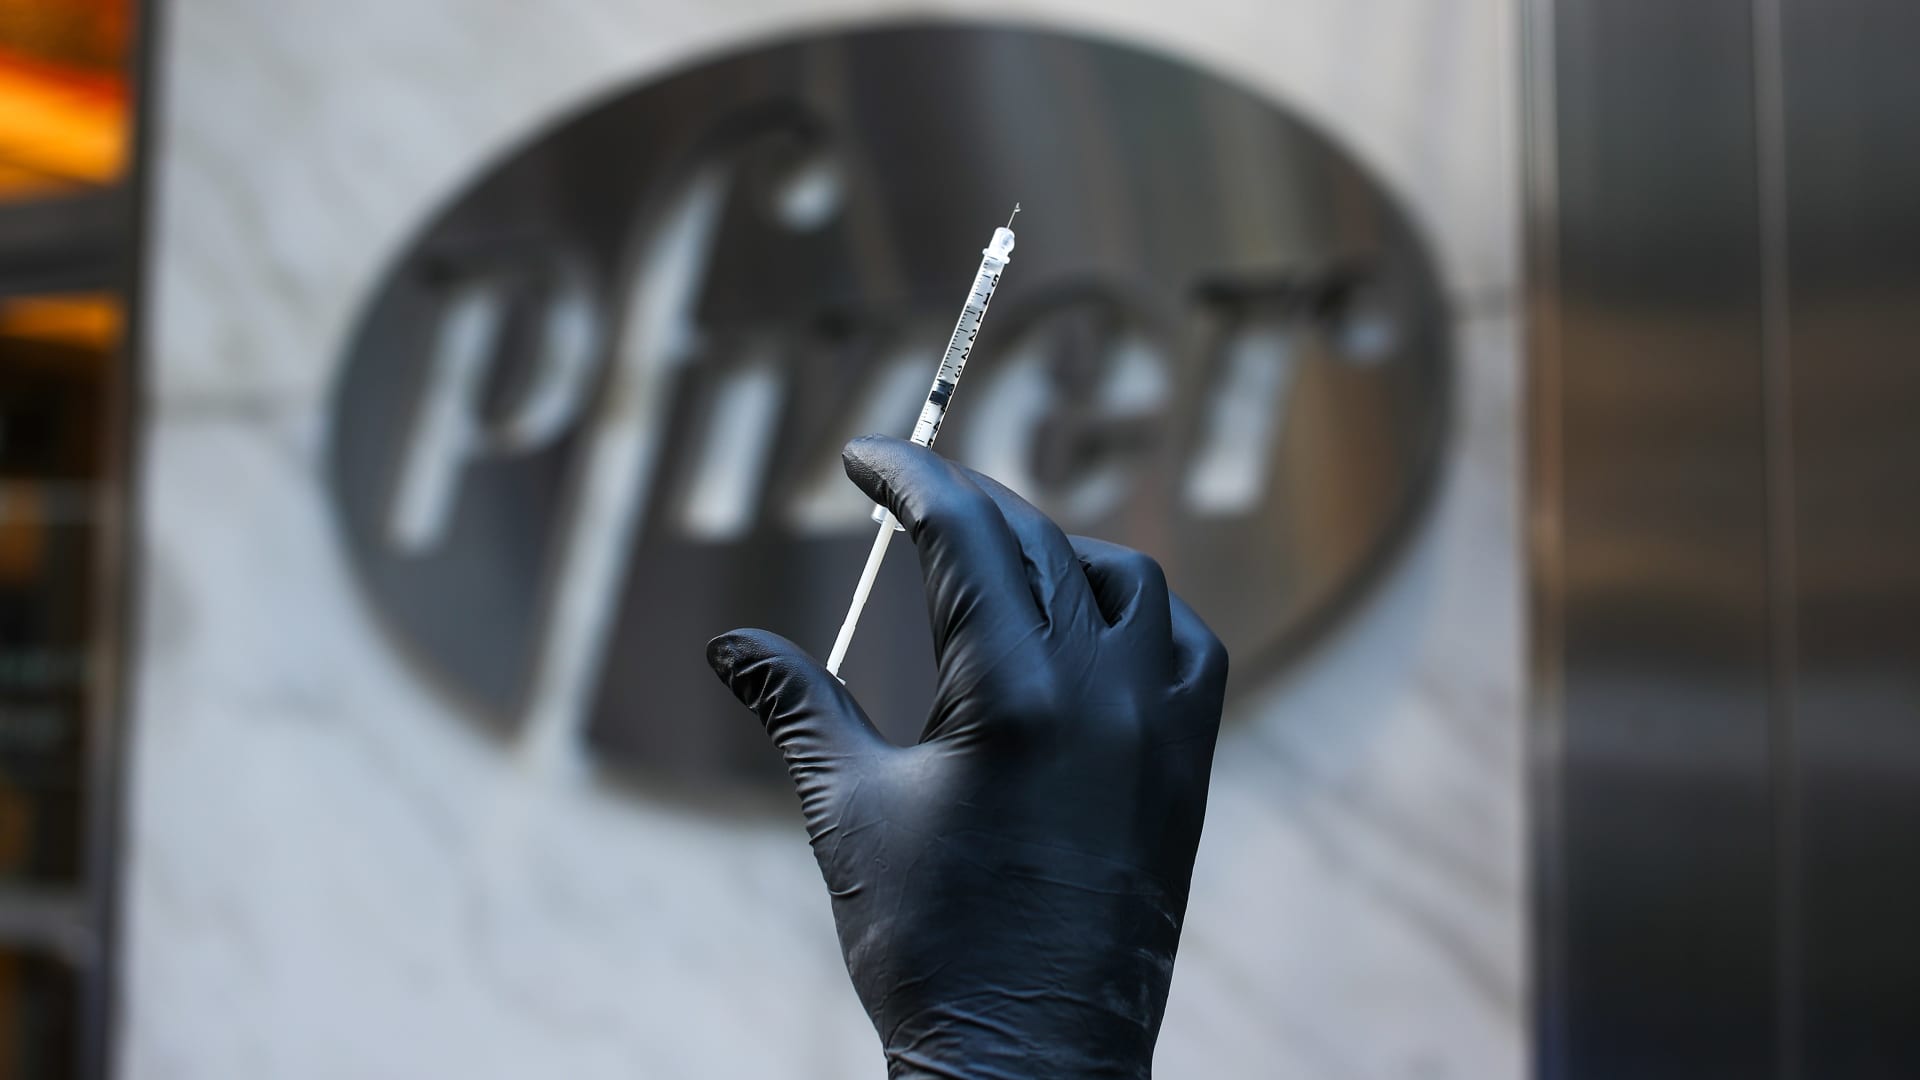 Pfizer and BioNTech request emergency authorization from FDA for Covid vaccine